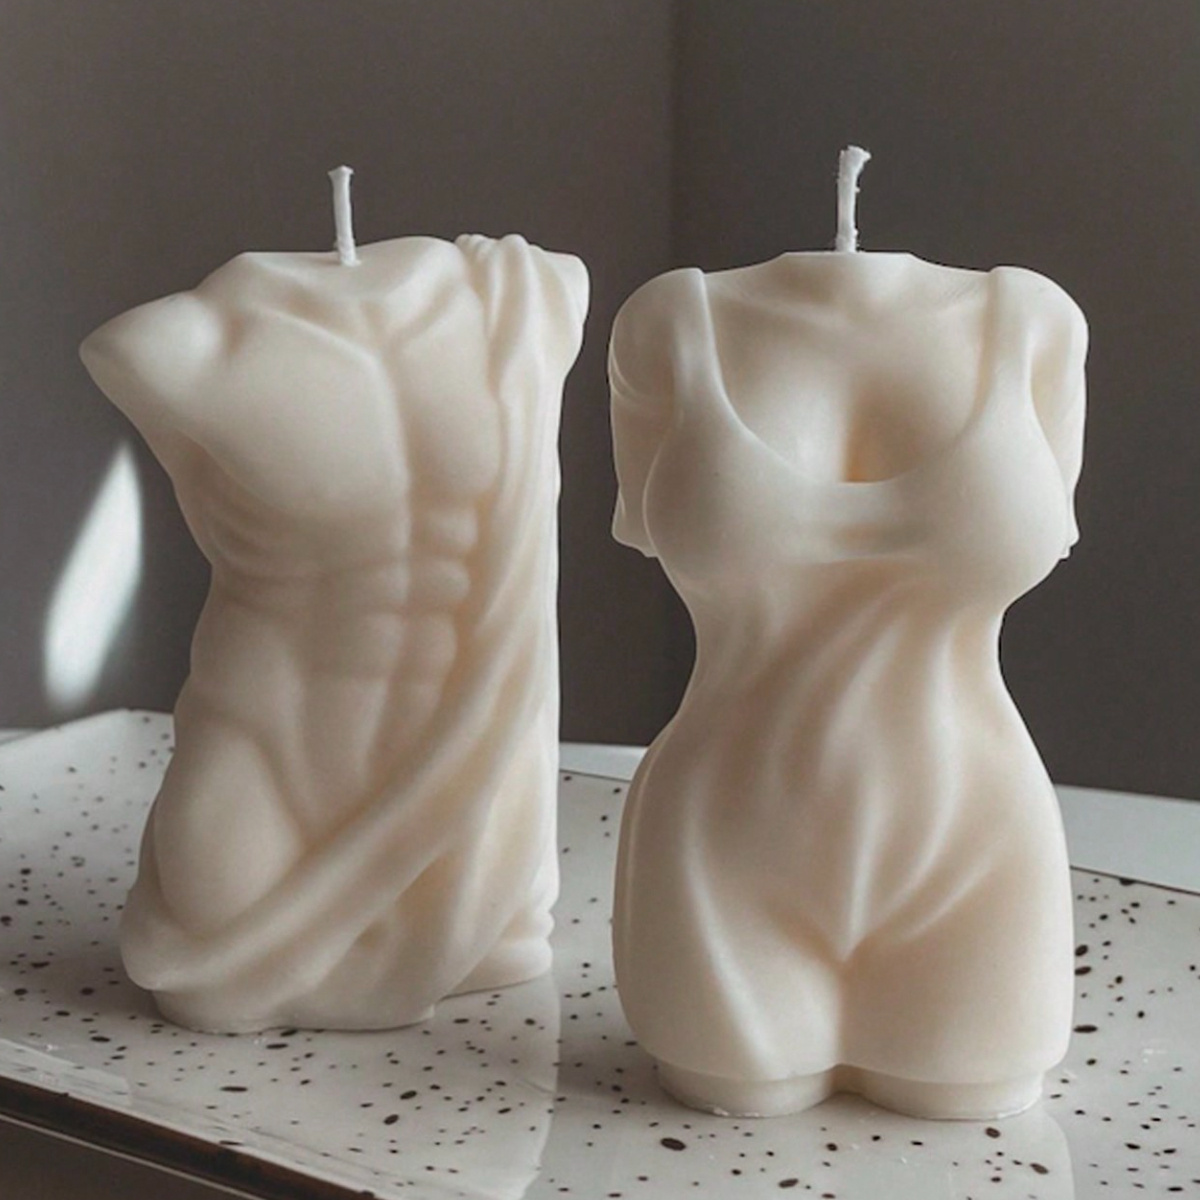 Female Vagina Sex Silicone Candle Molds Soap Clay Resin Mould Tool Scented  Crafts for Bedroom/Bathroom Ornaments